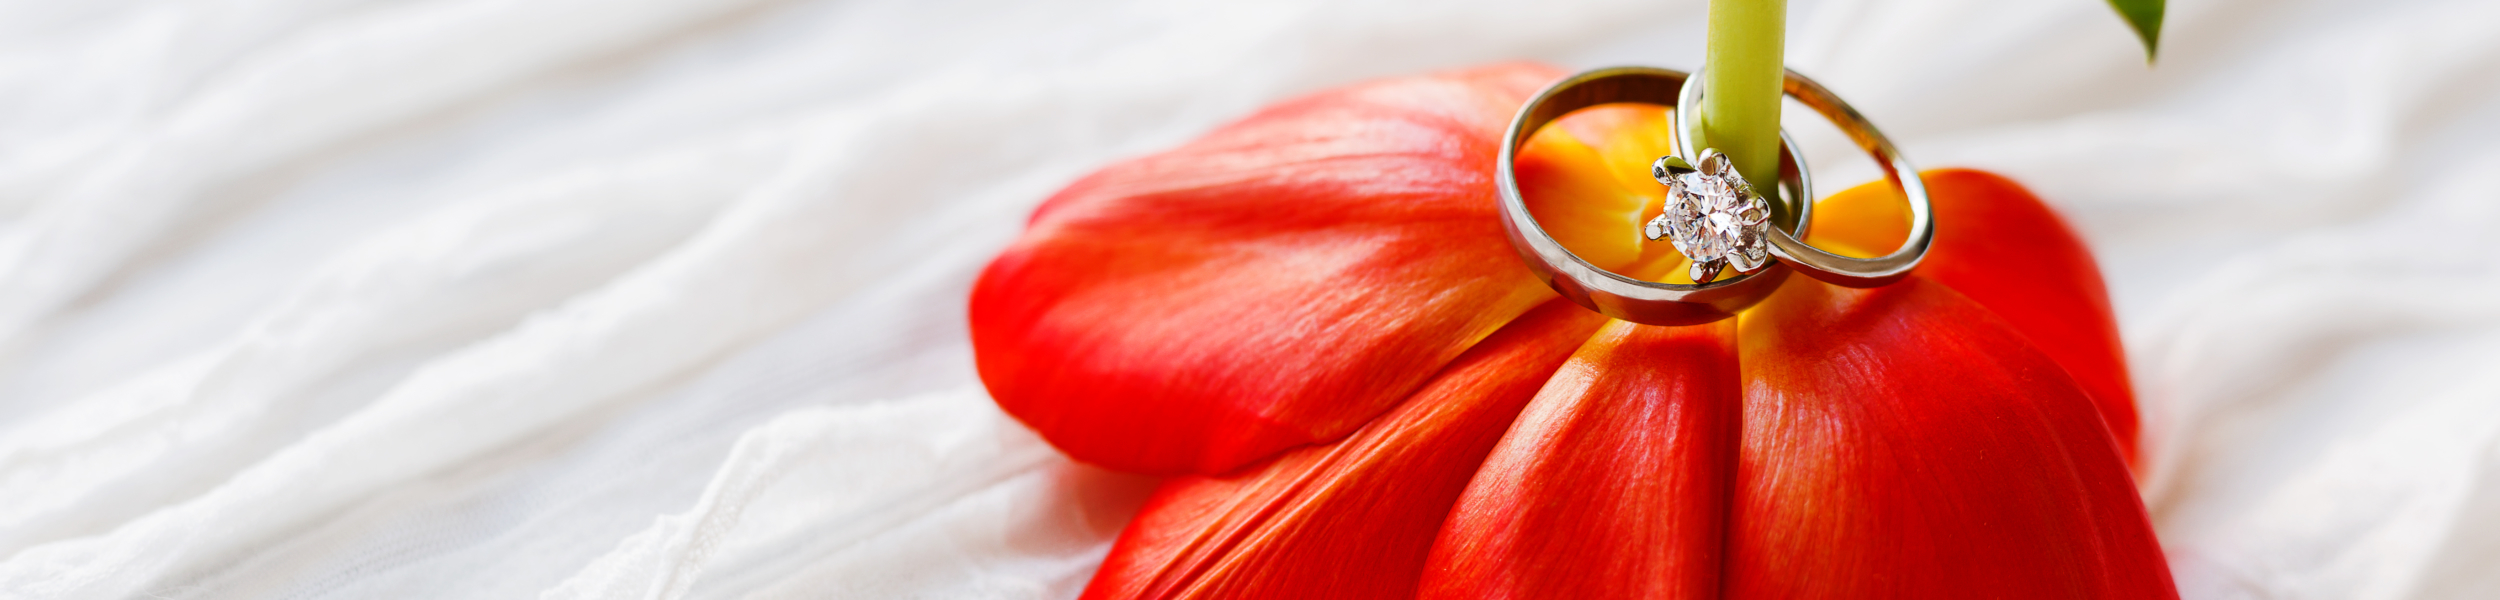 Pair of wedding and engagement rings with diamond on red tulip. Natural background with symbol of love and marriage. Close up.